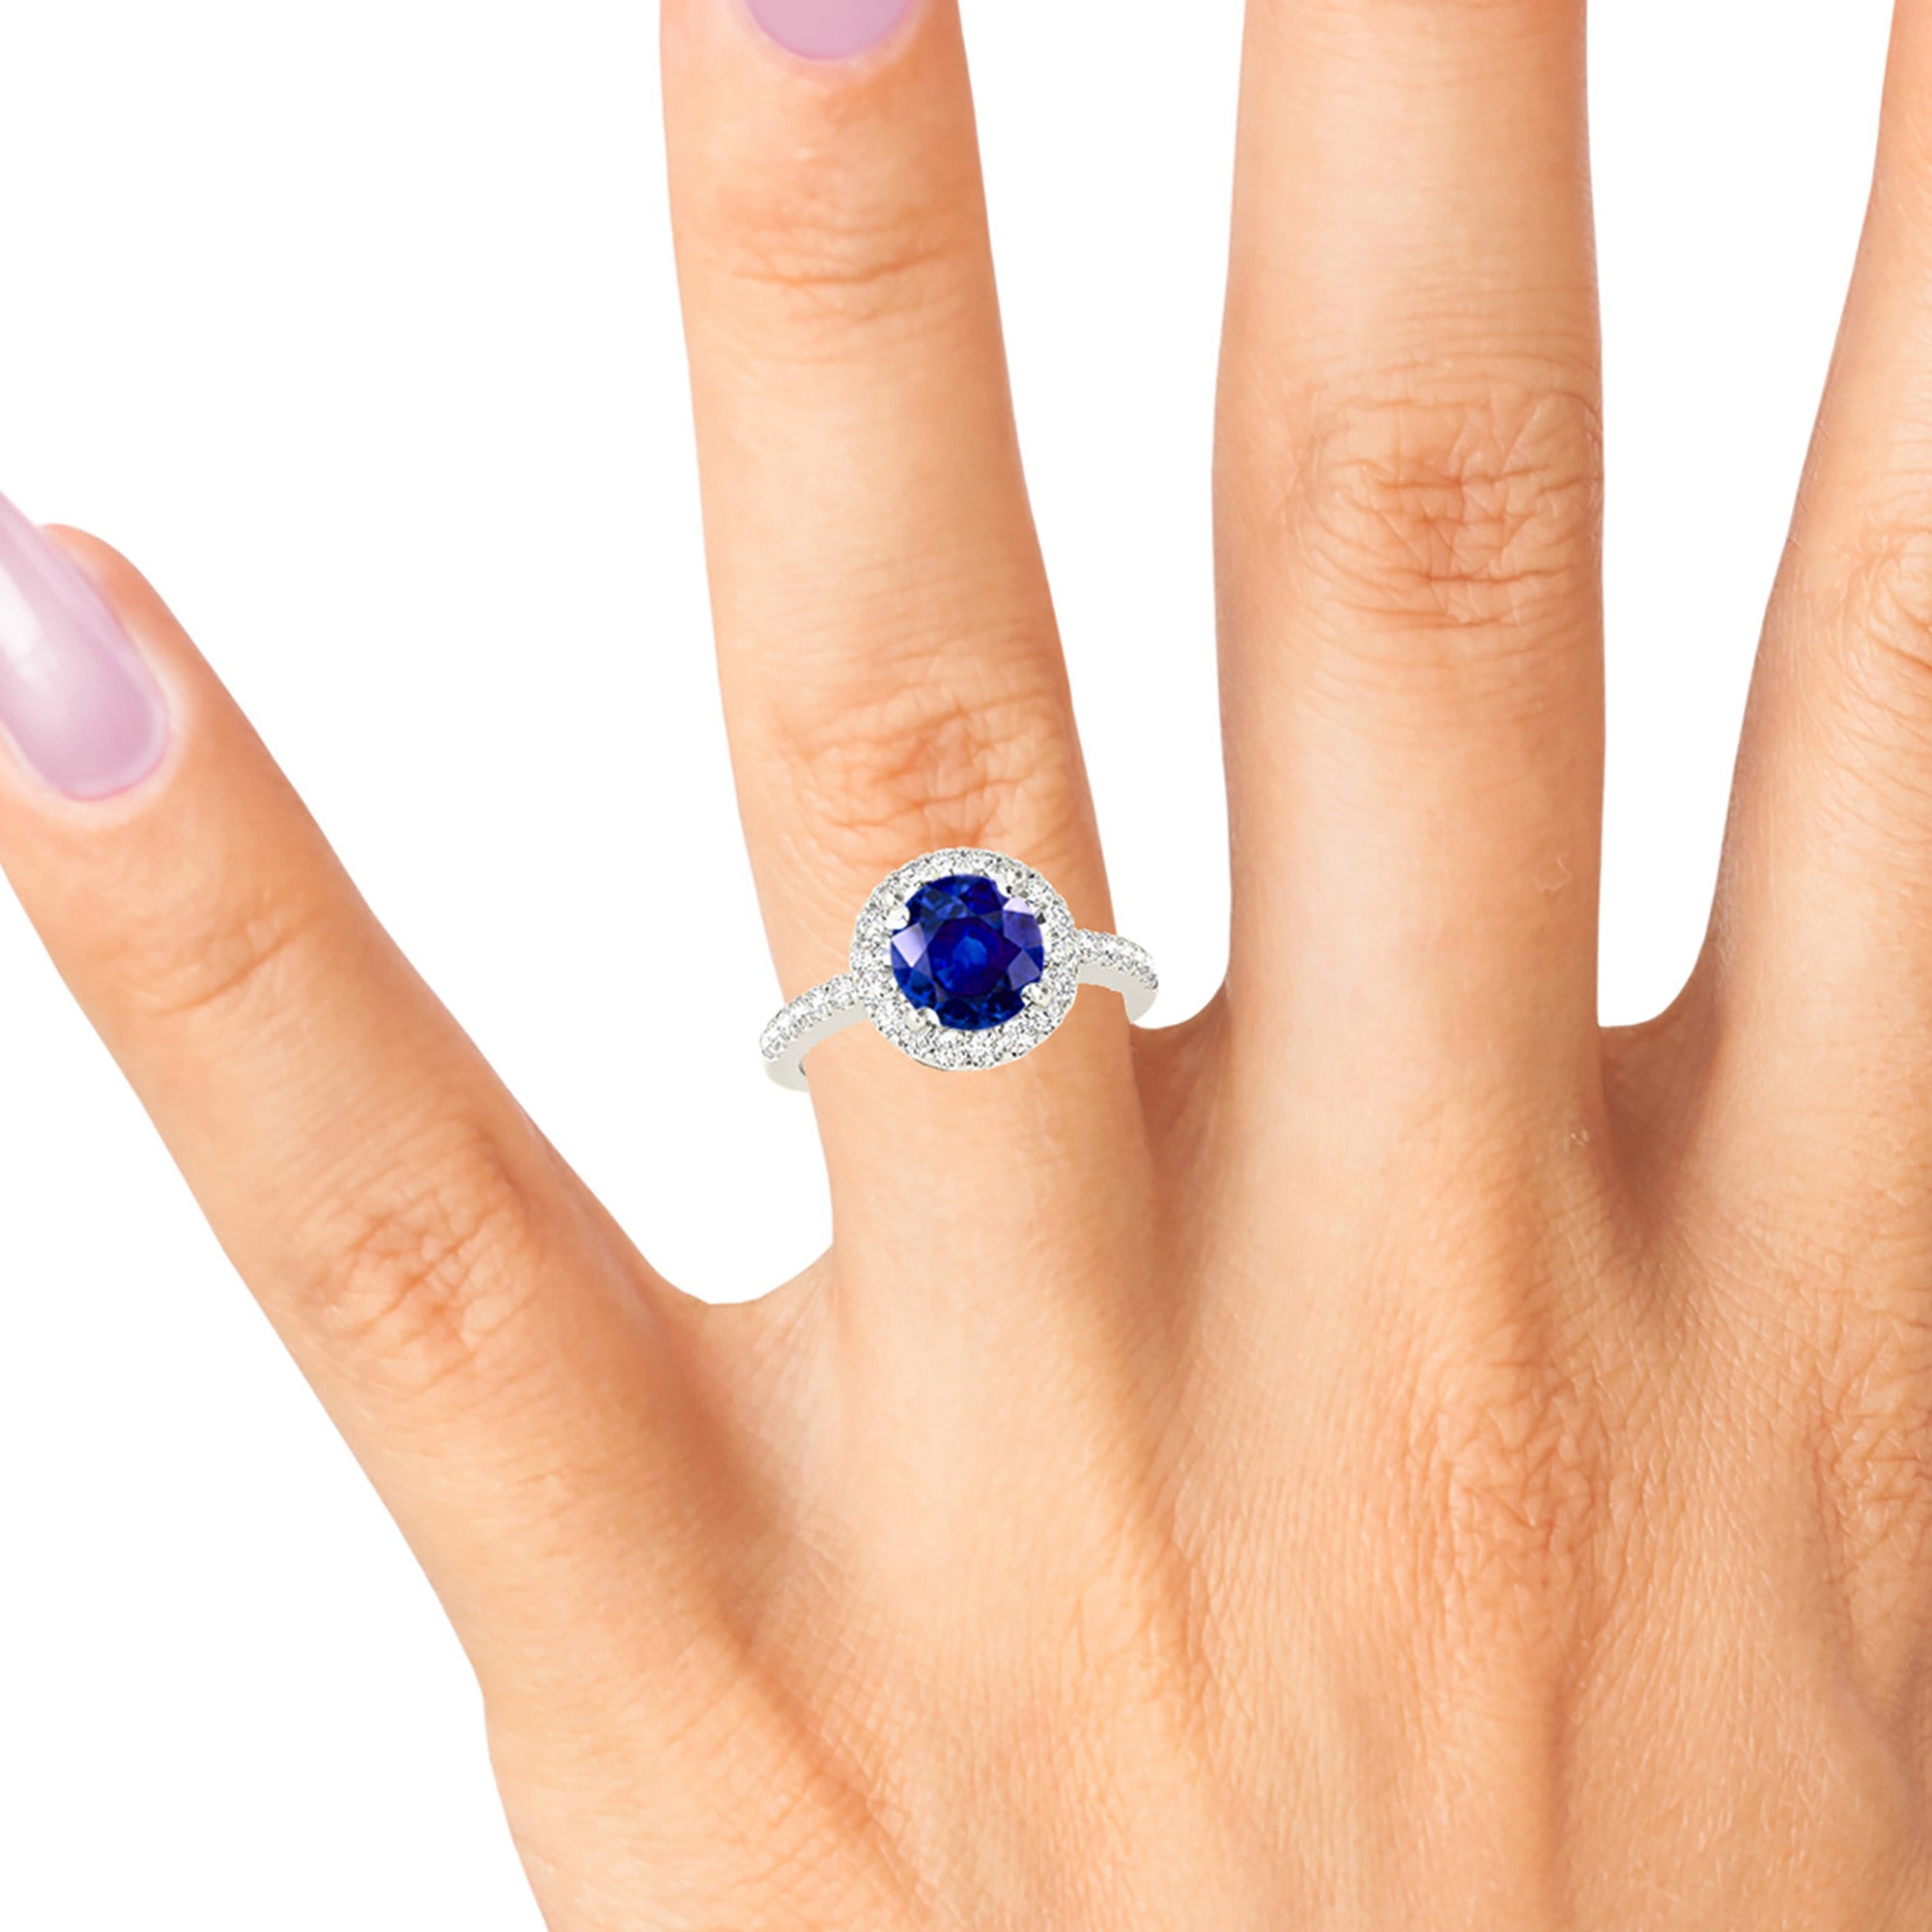 2.41 ct. Genuine Blue Sapphire Halo Ring With 0.45 ctw. Side Diamonds-in 14K/18K White, Yellow, Rose Gold and Platinum - Christmas Jewelry Gift -VIRABYANI